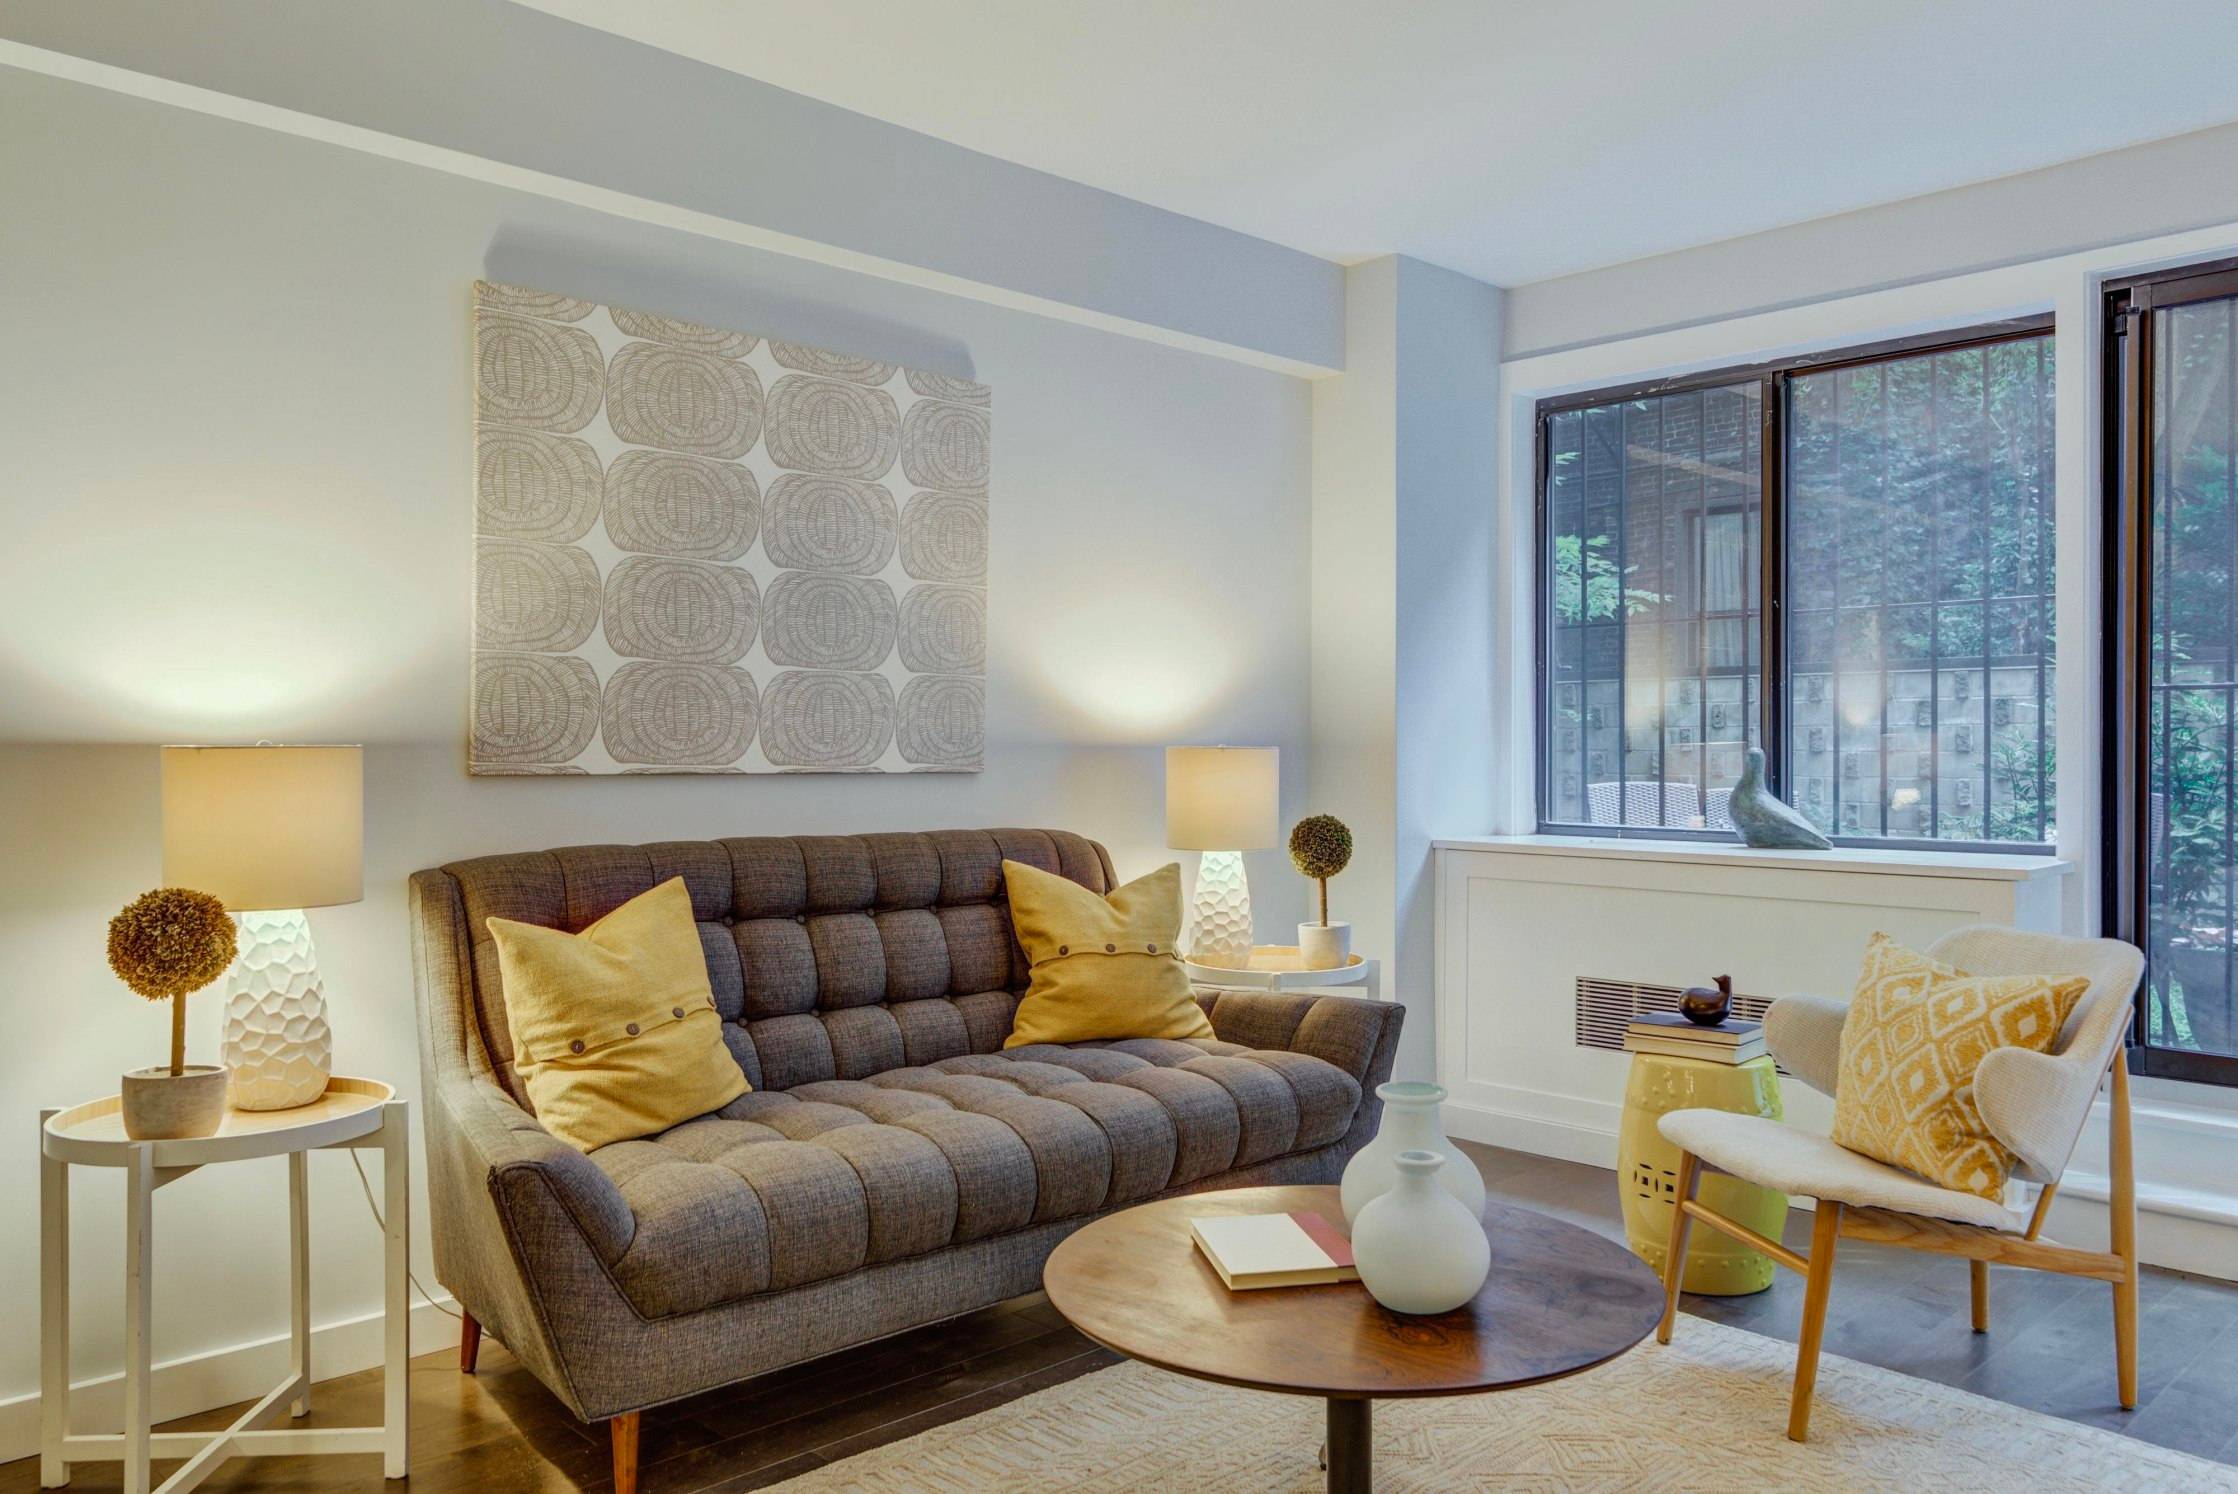 Exquisitely Renovated One Bedroom With Private Outdoor Garden Space.